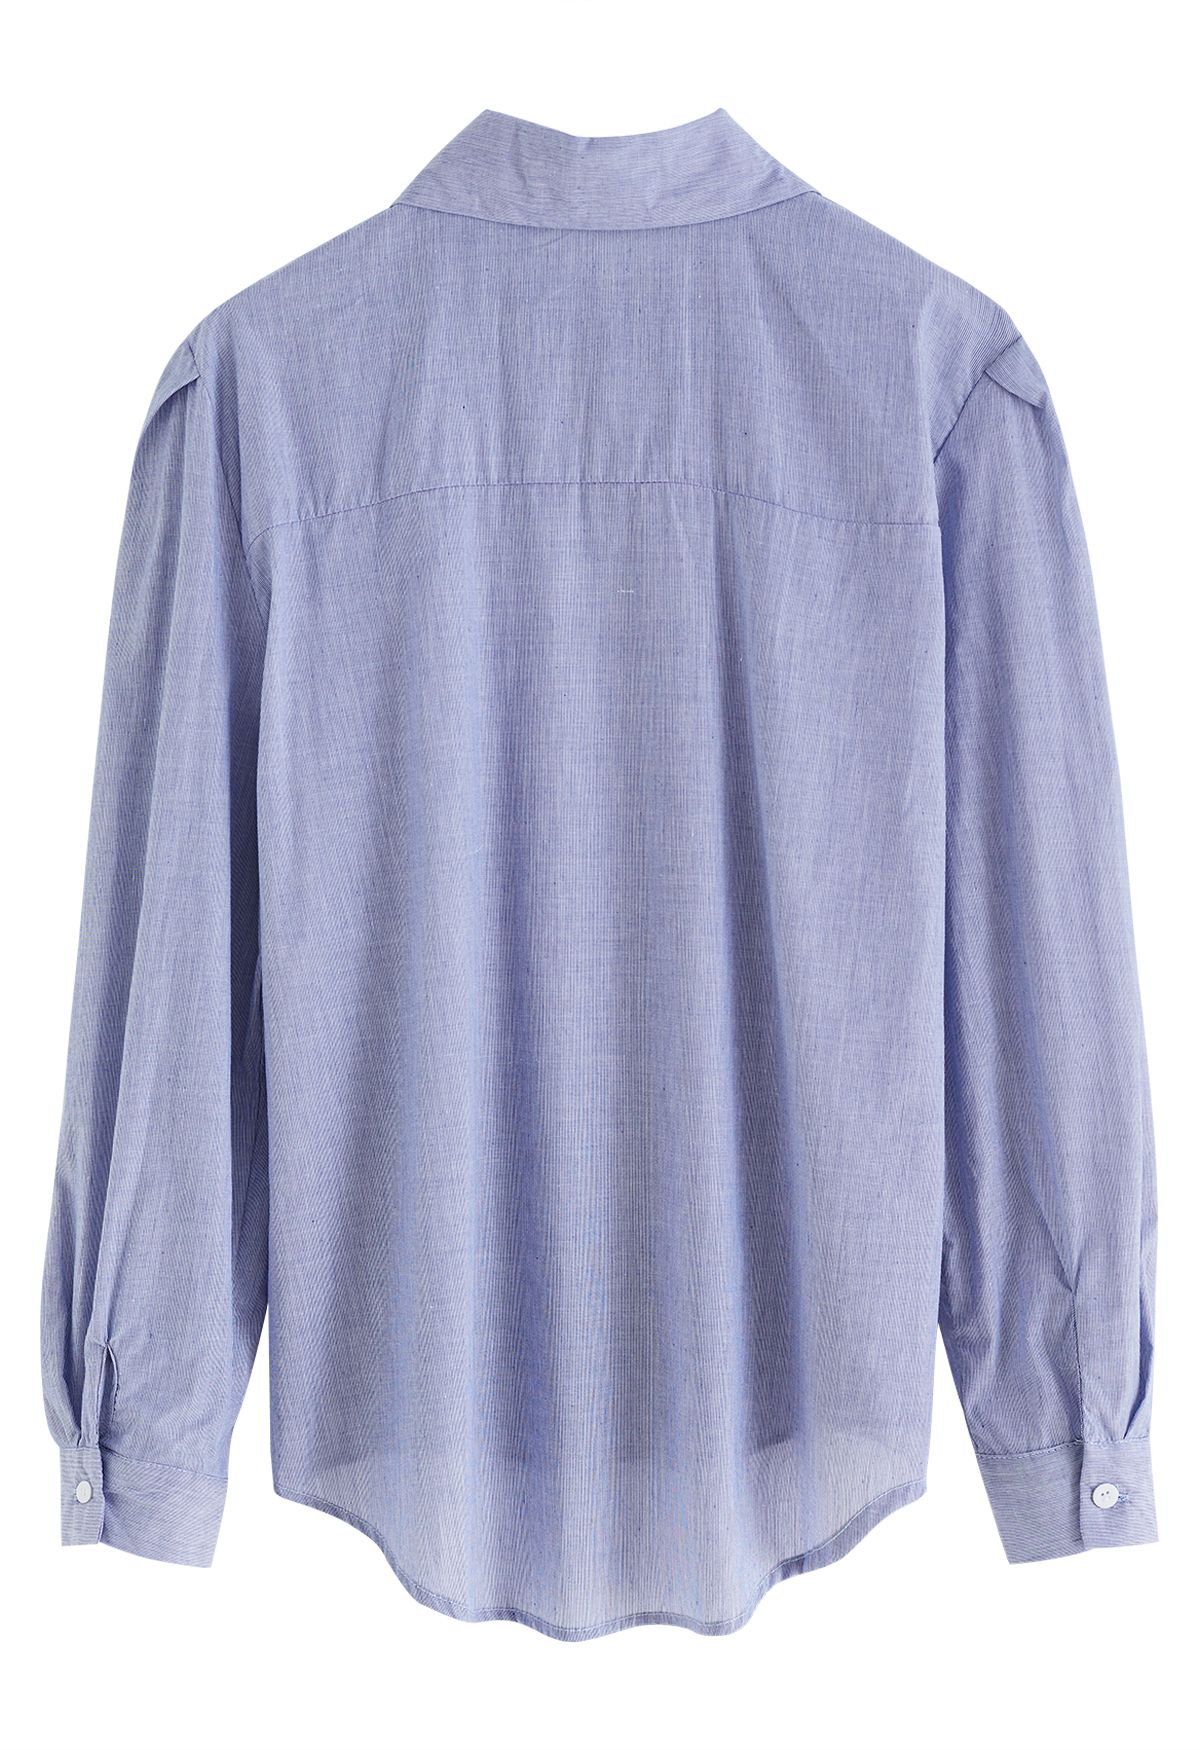 Bubble Sleeve Pinstripe Cotton Shirt in Blue - Retro, Indie and Unique ...